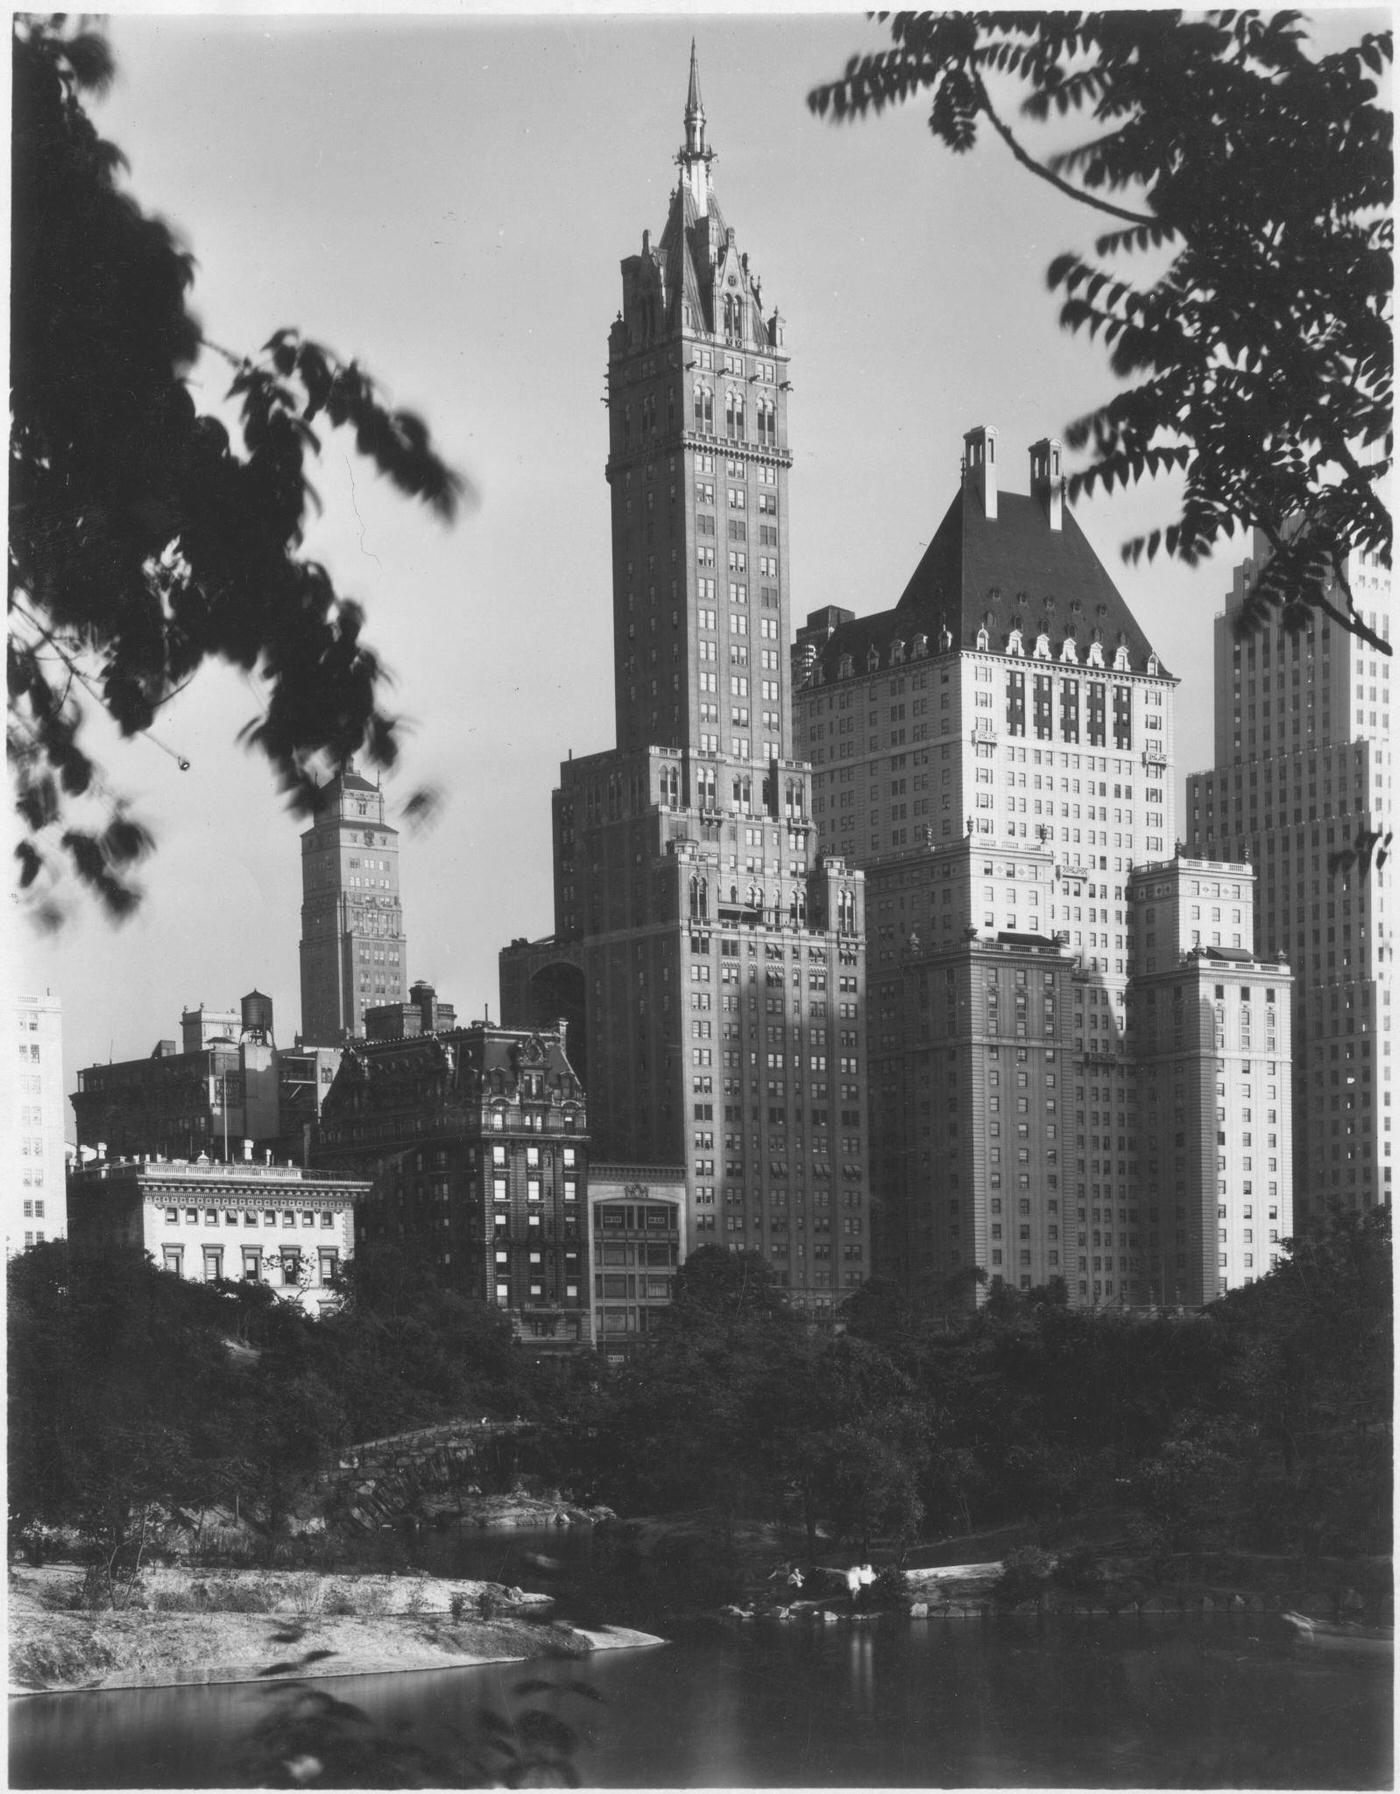 Sherry Netherland And Savoy Plaza Hotels, 59Th St Central Park, Manhattan, 1929.